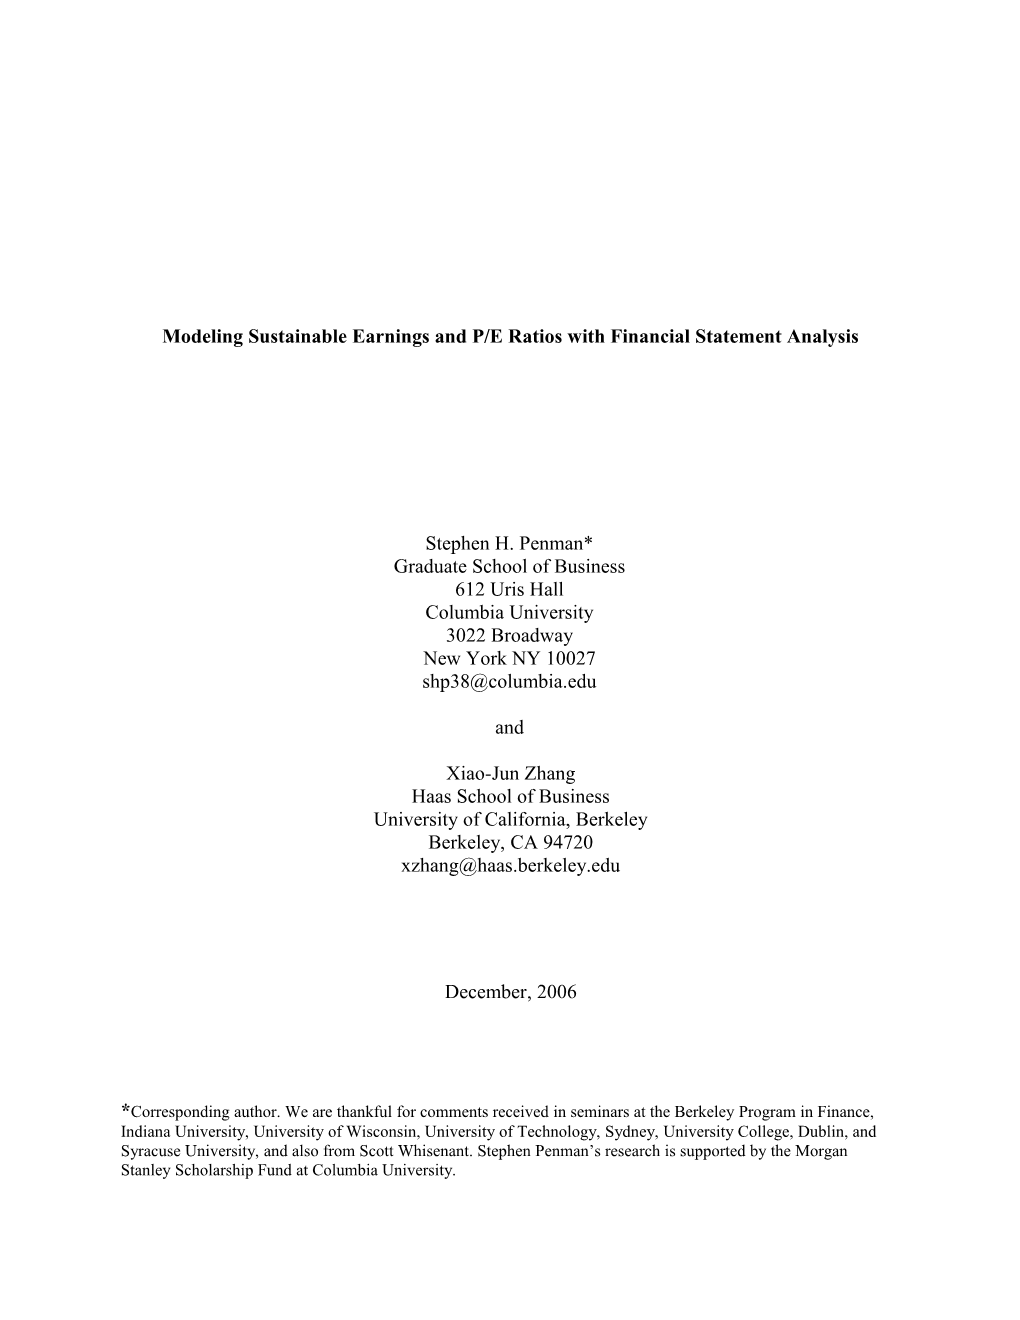 A Model of Sustainable Earnings Based on Financial Statement Information